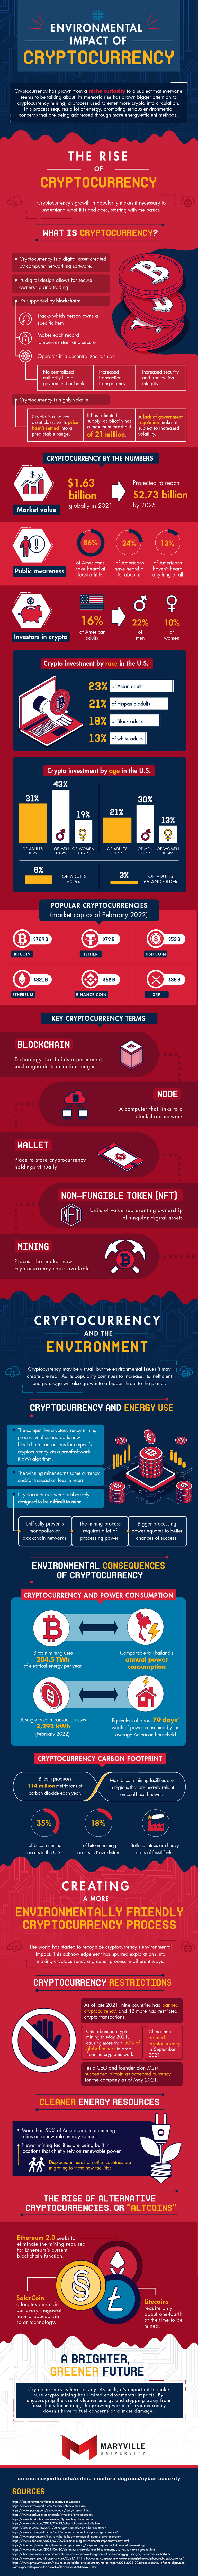 The environmental impact of cryptocurrency mining.